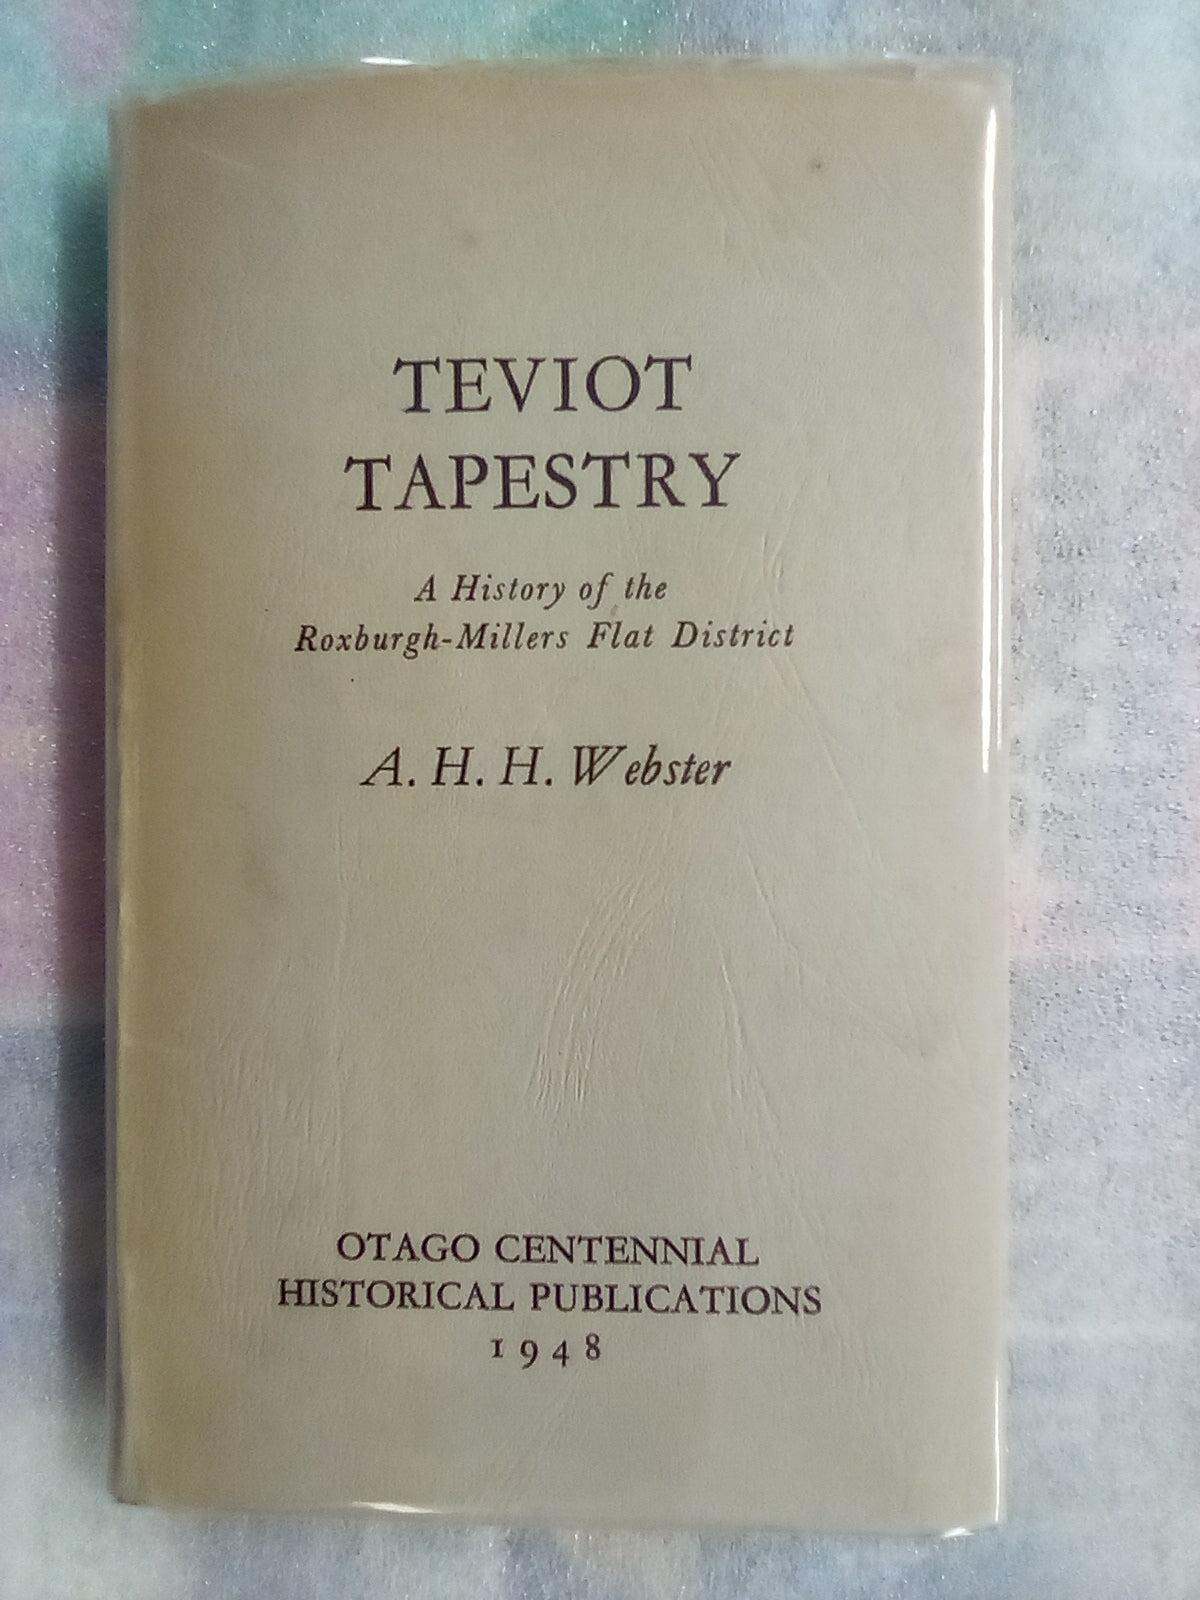 Teviot Tapestry - A History of the Roxburgh - Millers Flat District (1948) by A.H.H. Webster